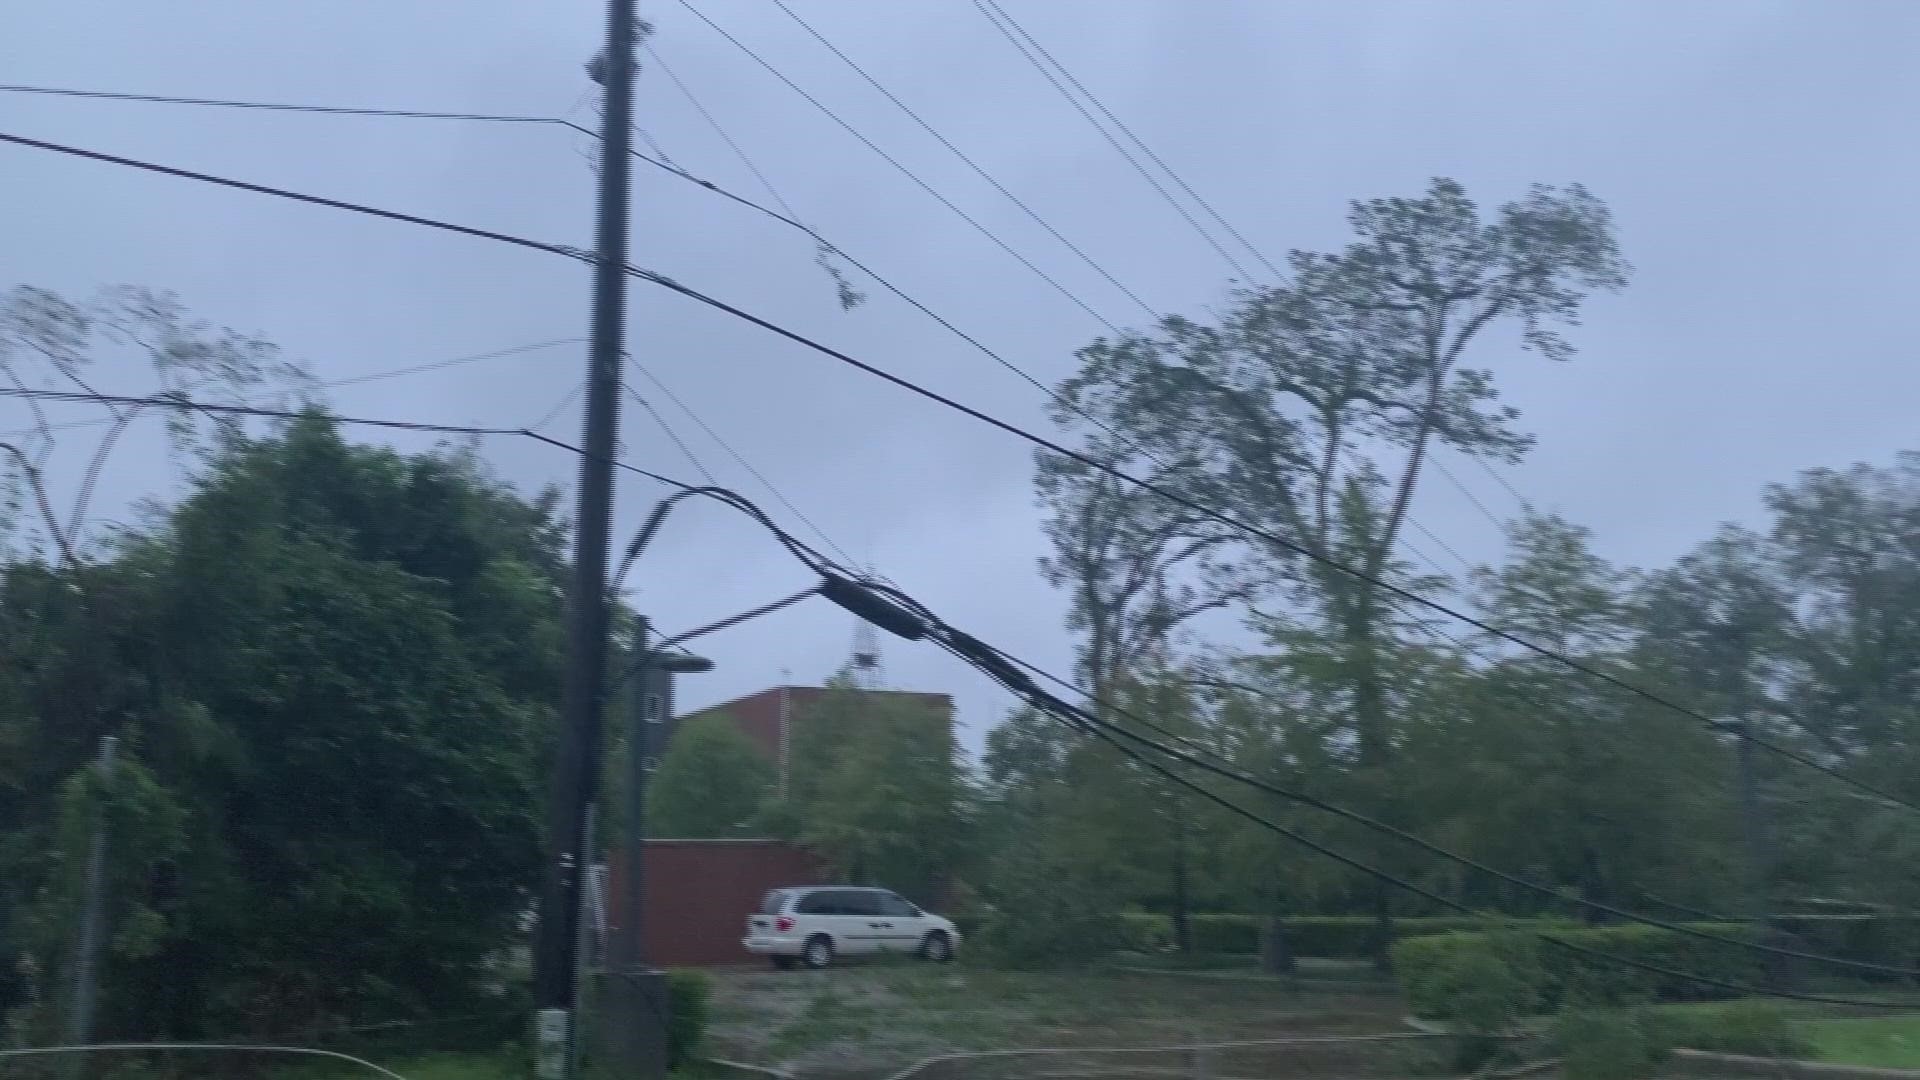 As light came out Monday, photographer Derek Waldrip captured the damage in Amite, Louisiana.